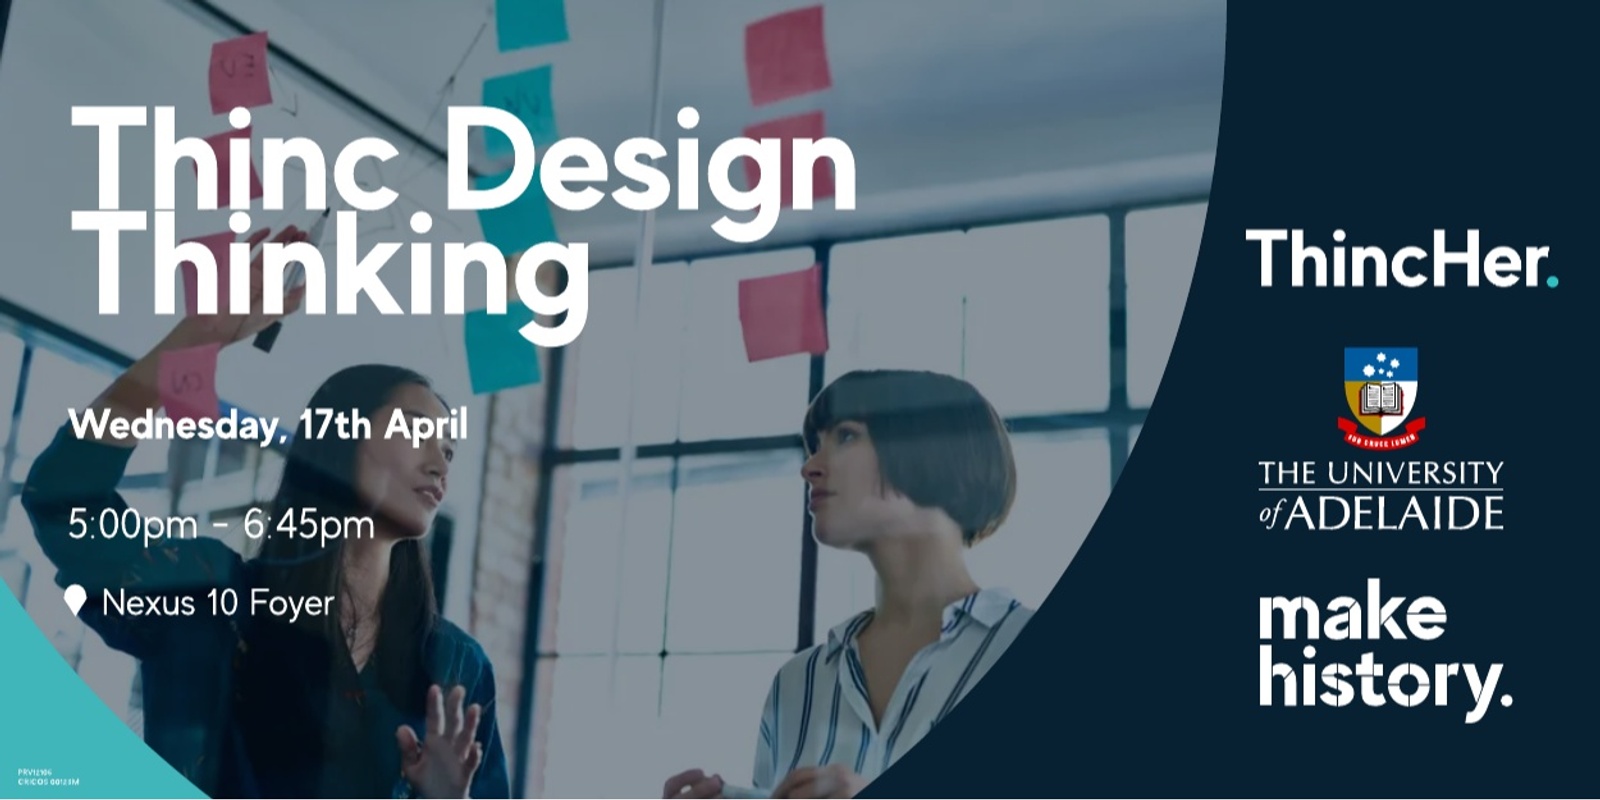 Banner image for Thinc Design Thinking